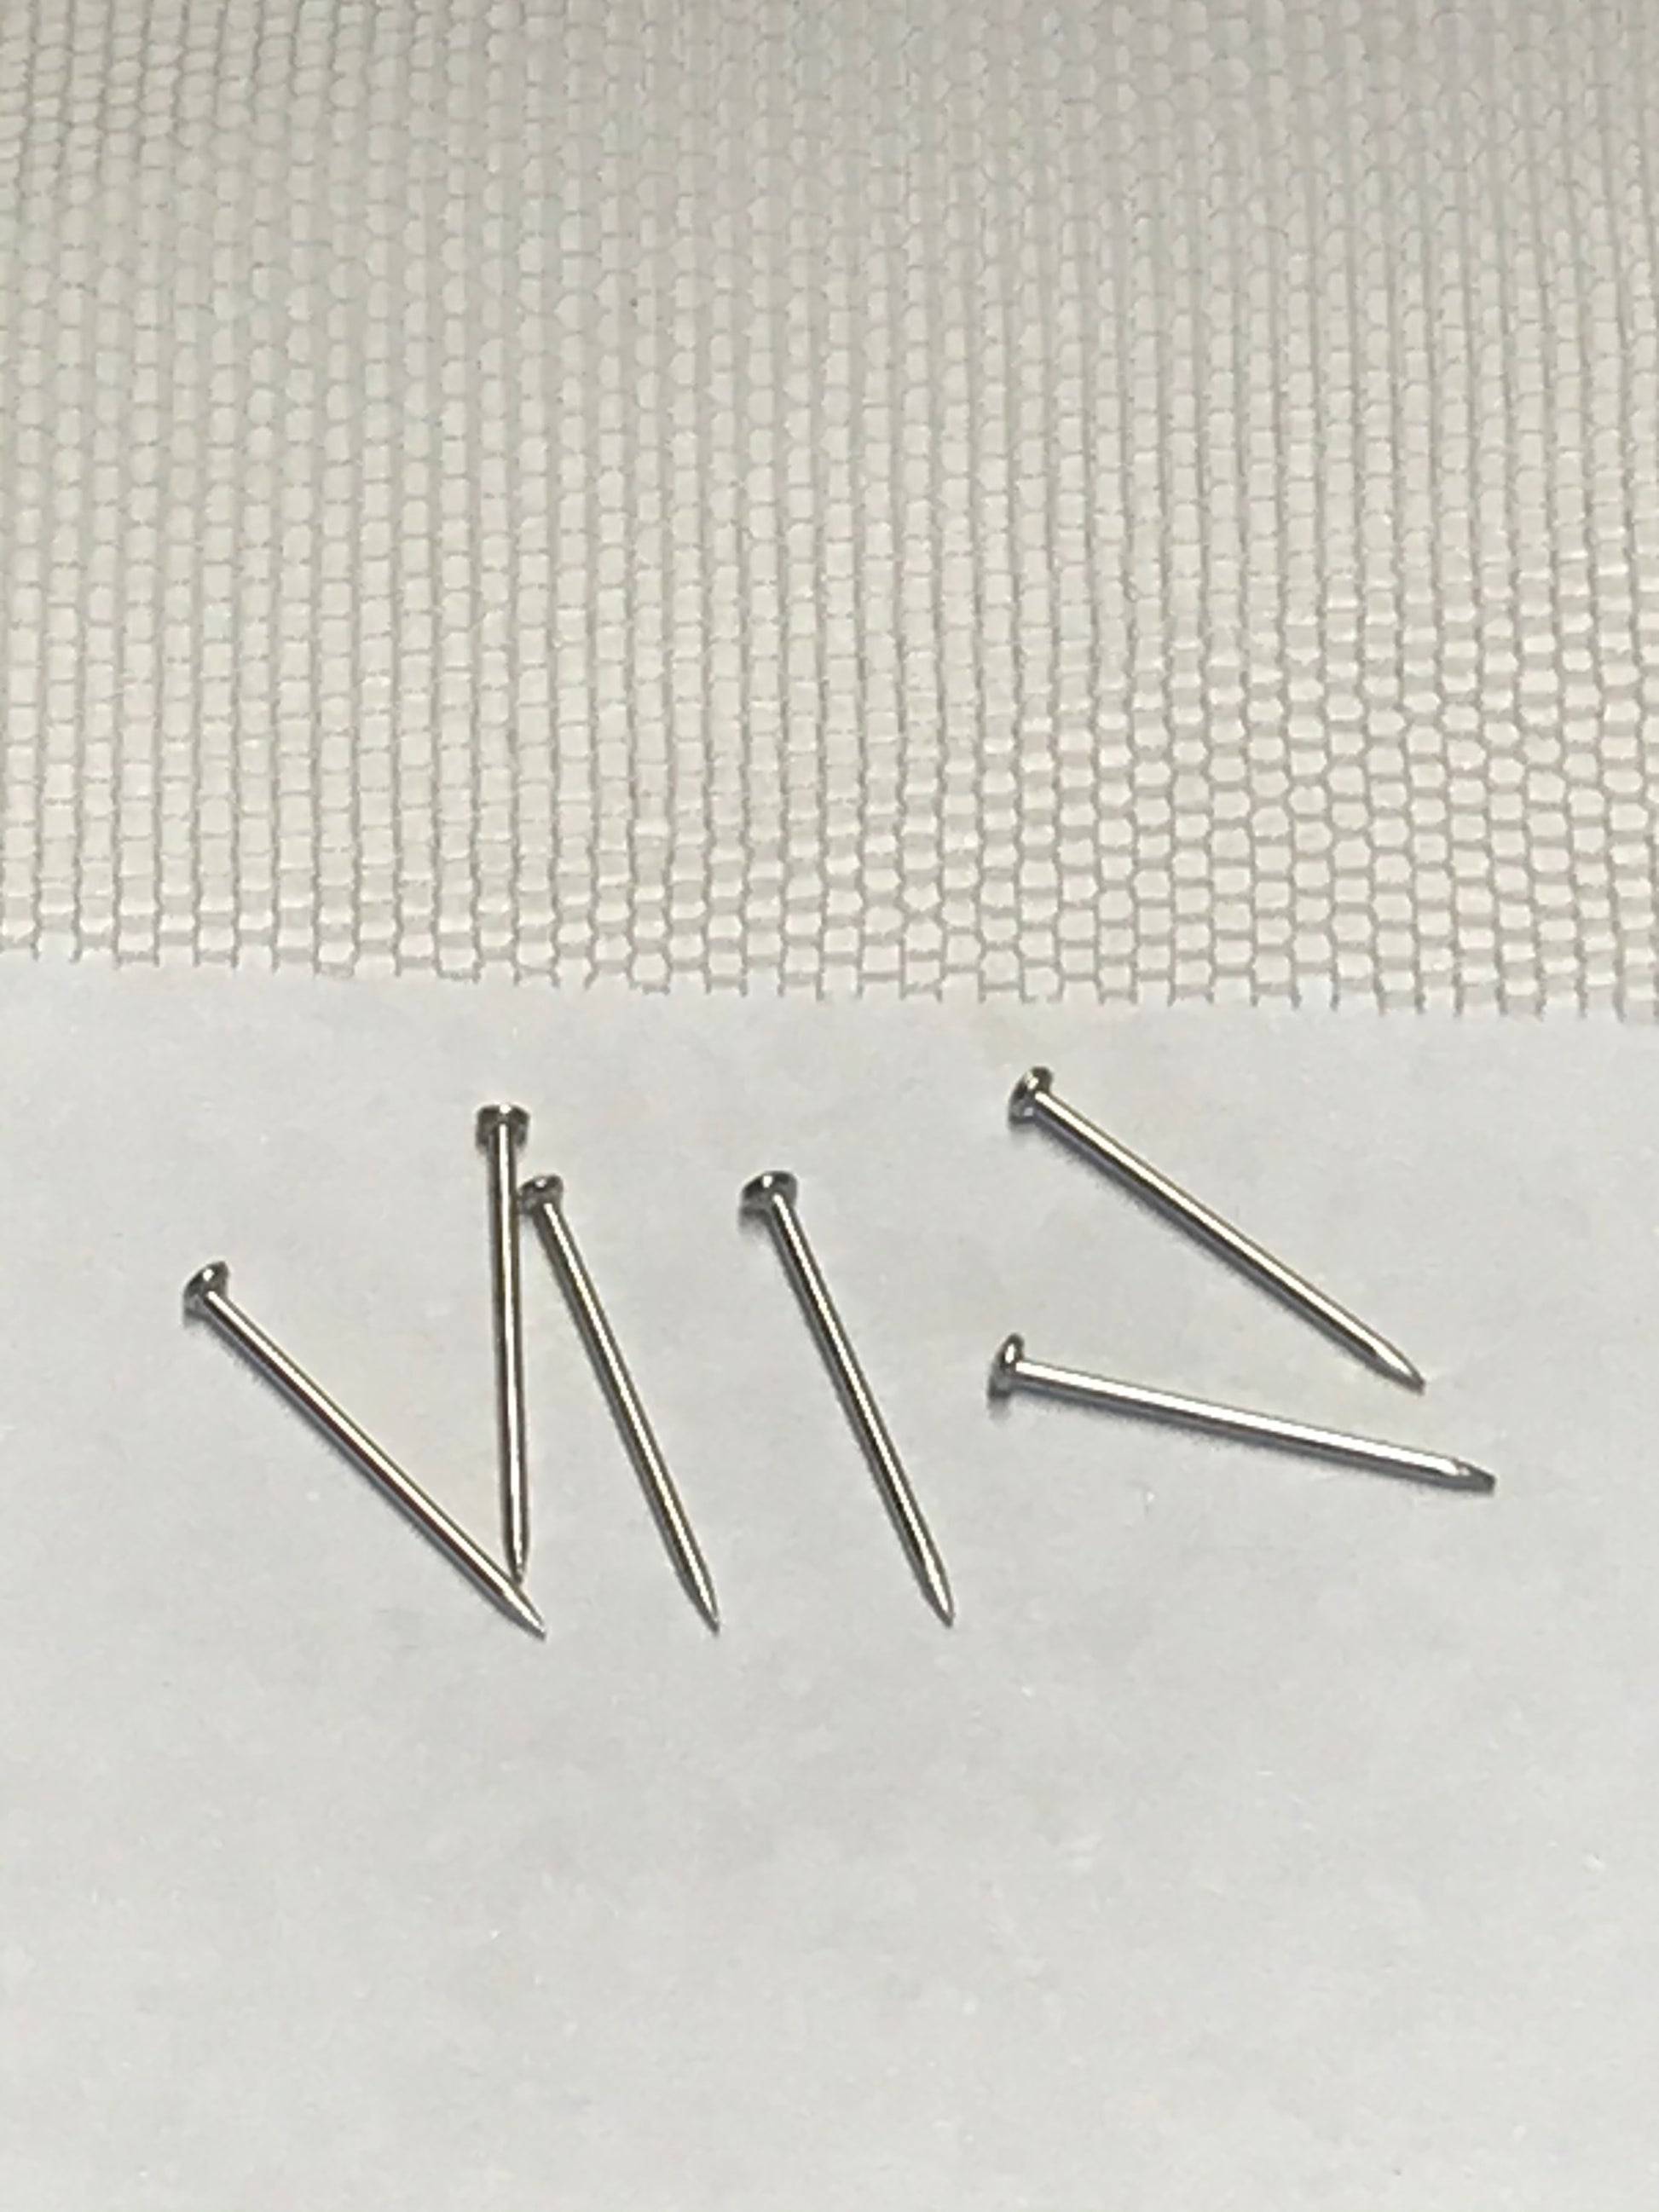 Super Small Pins for Blocking Wigs - The Wig Department